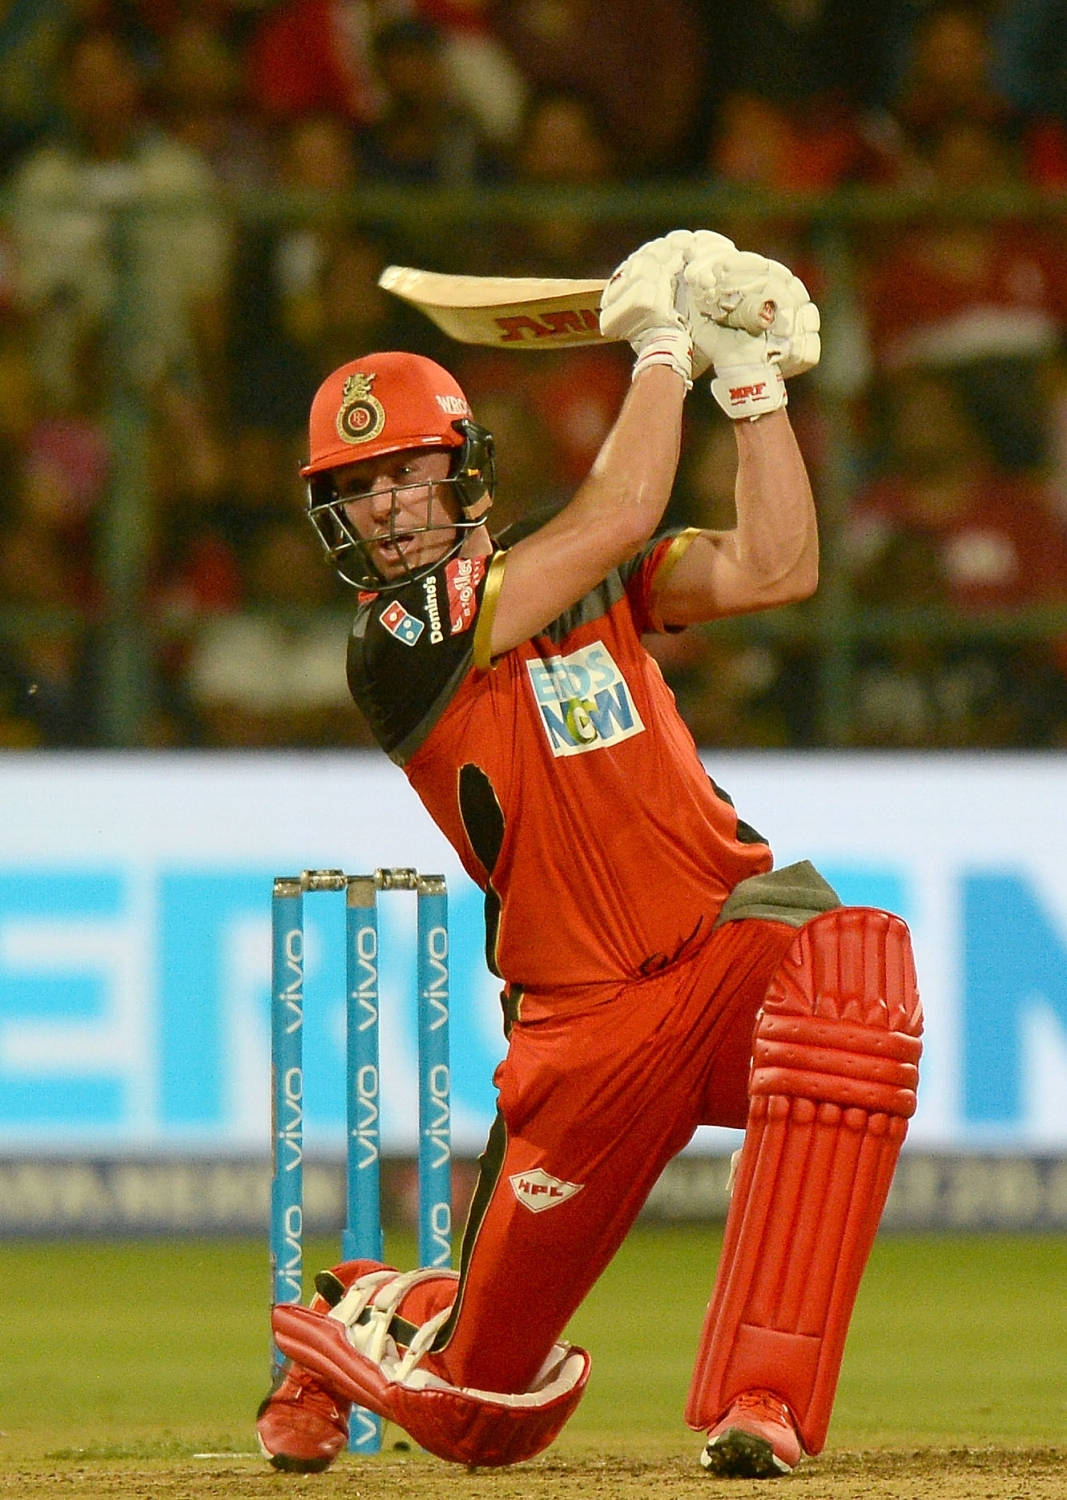 Power Stance - The On-field Strength Of Ab De Villiers In Rcb Gear Wallpaper